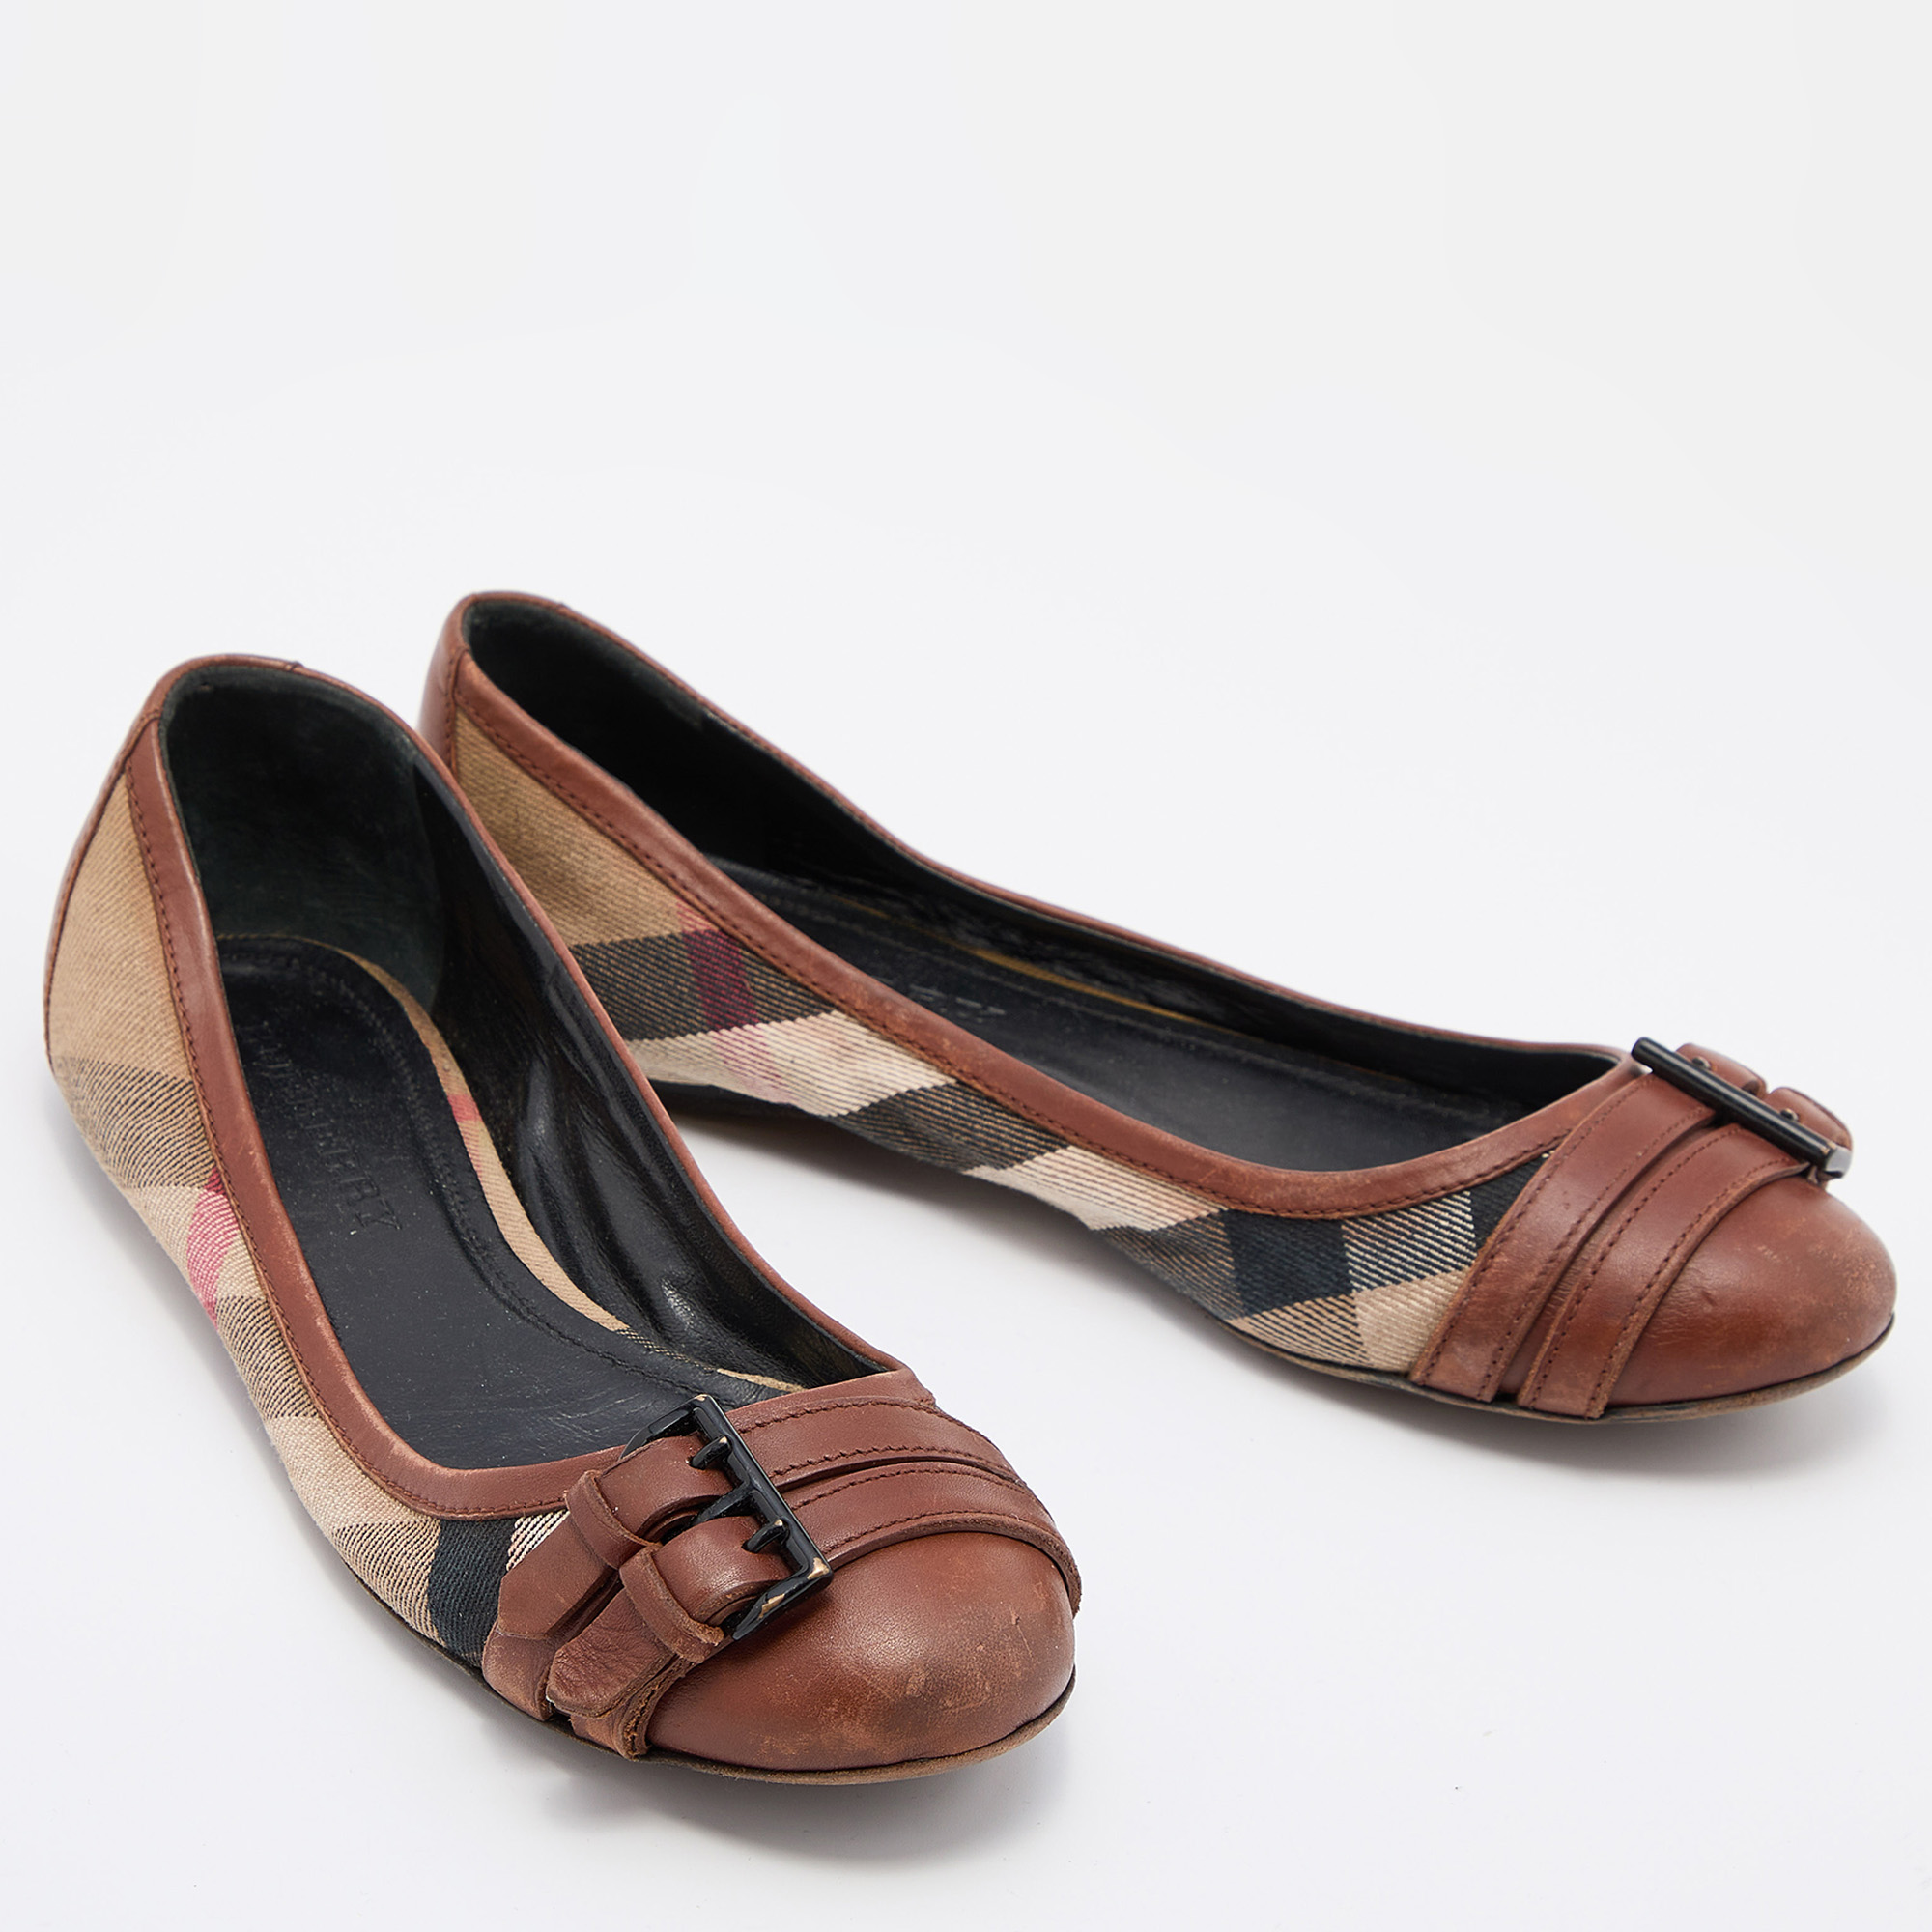 Burberry Beige/Tan Nova Check Canvas And Leather Buckle Ballet Flats Size 38